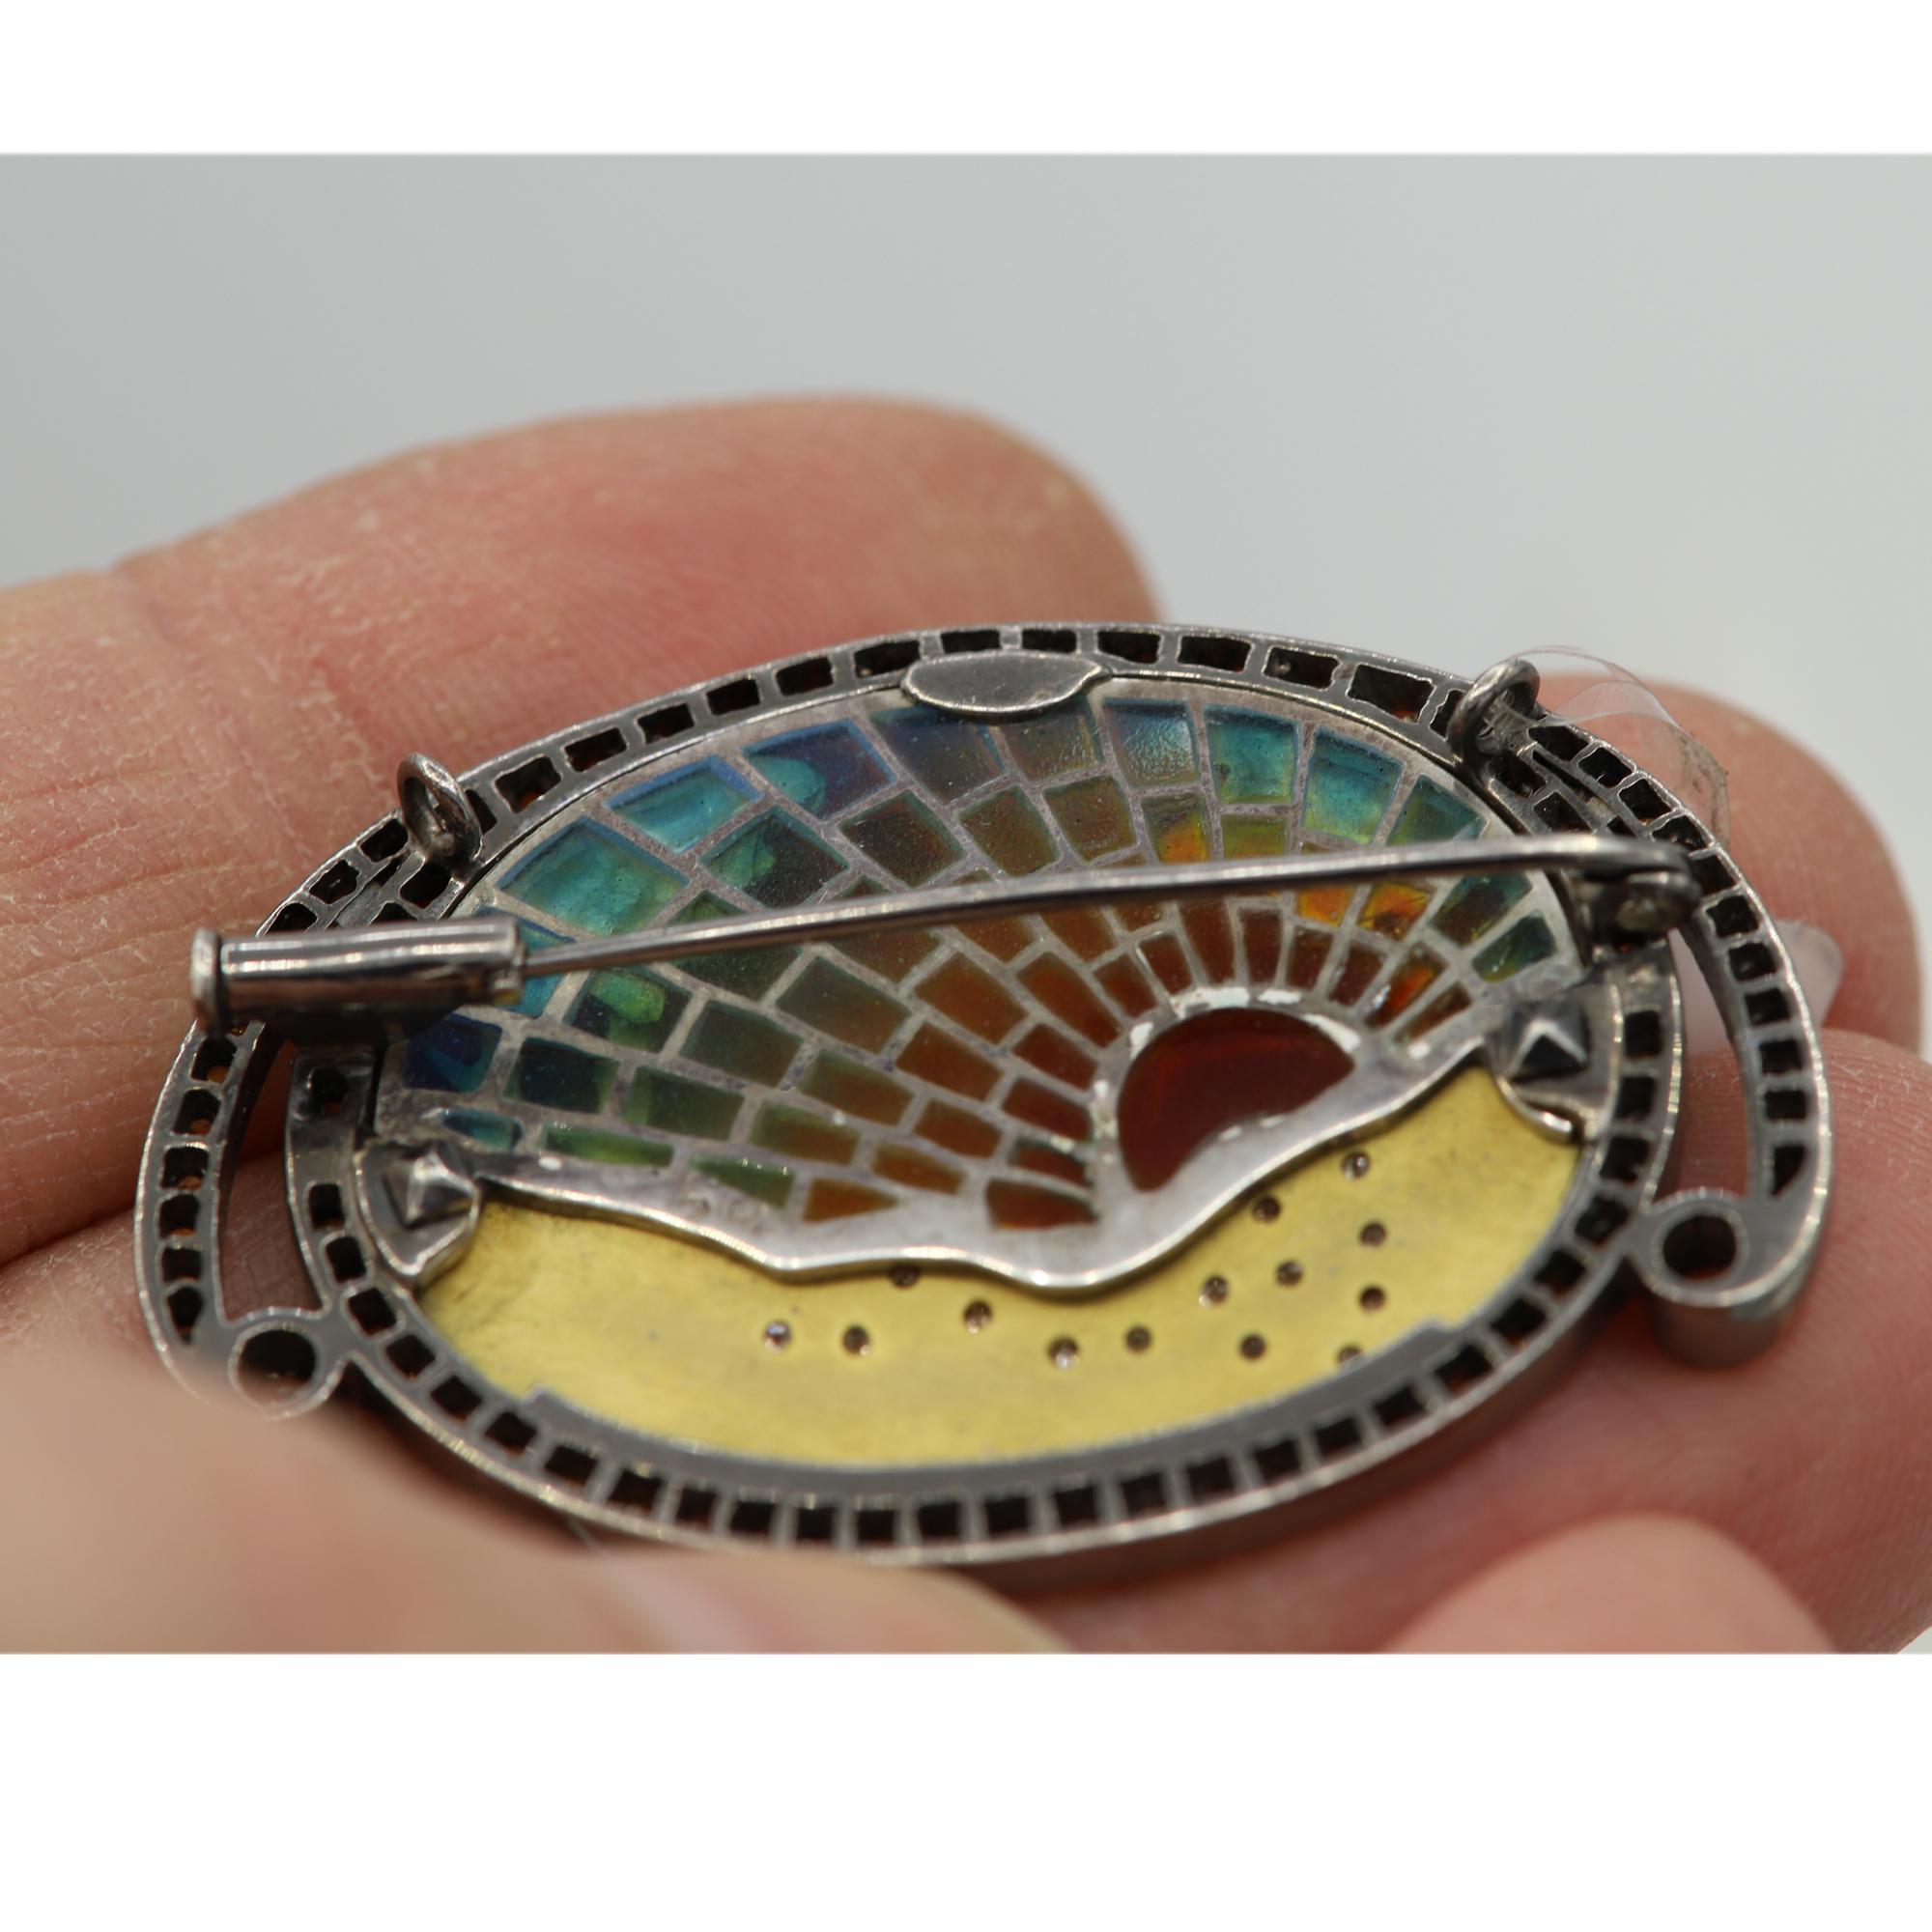 Hand made in Spain, a Brilliant Artistic fire Enamel Brooch -Necklace
very colorful made with Diamonds and Sapphires.
Approx size 50 x 35 mm or  2' Inch
can be fitted with a chain for necklace wear - Chain - Not included.
Total Diamonds 0.31